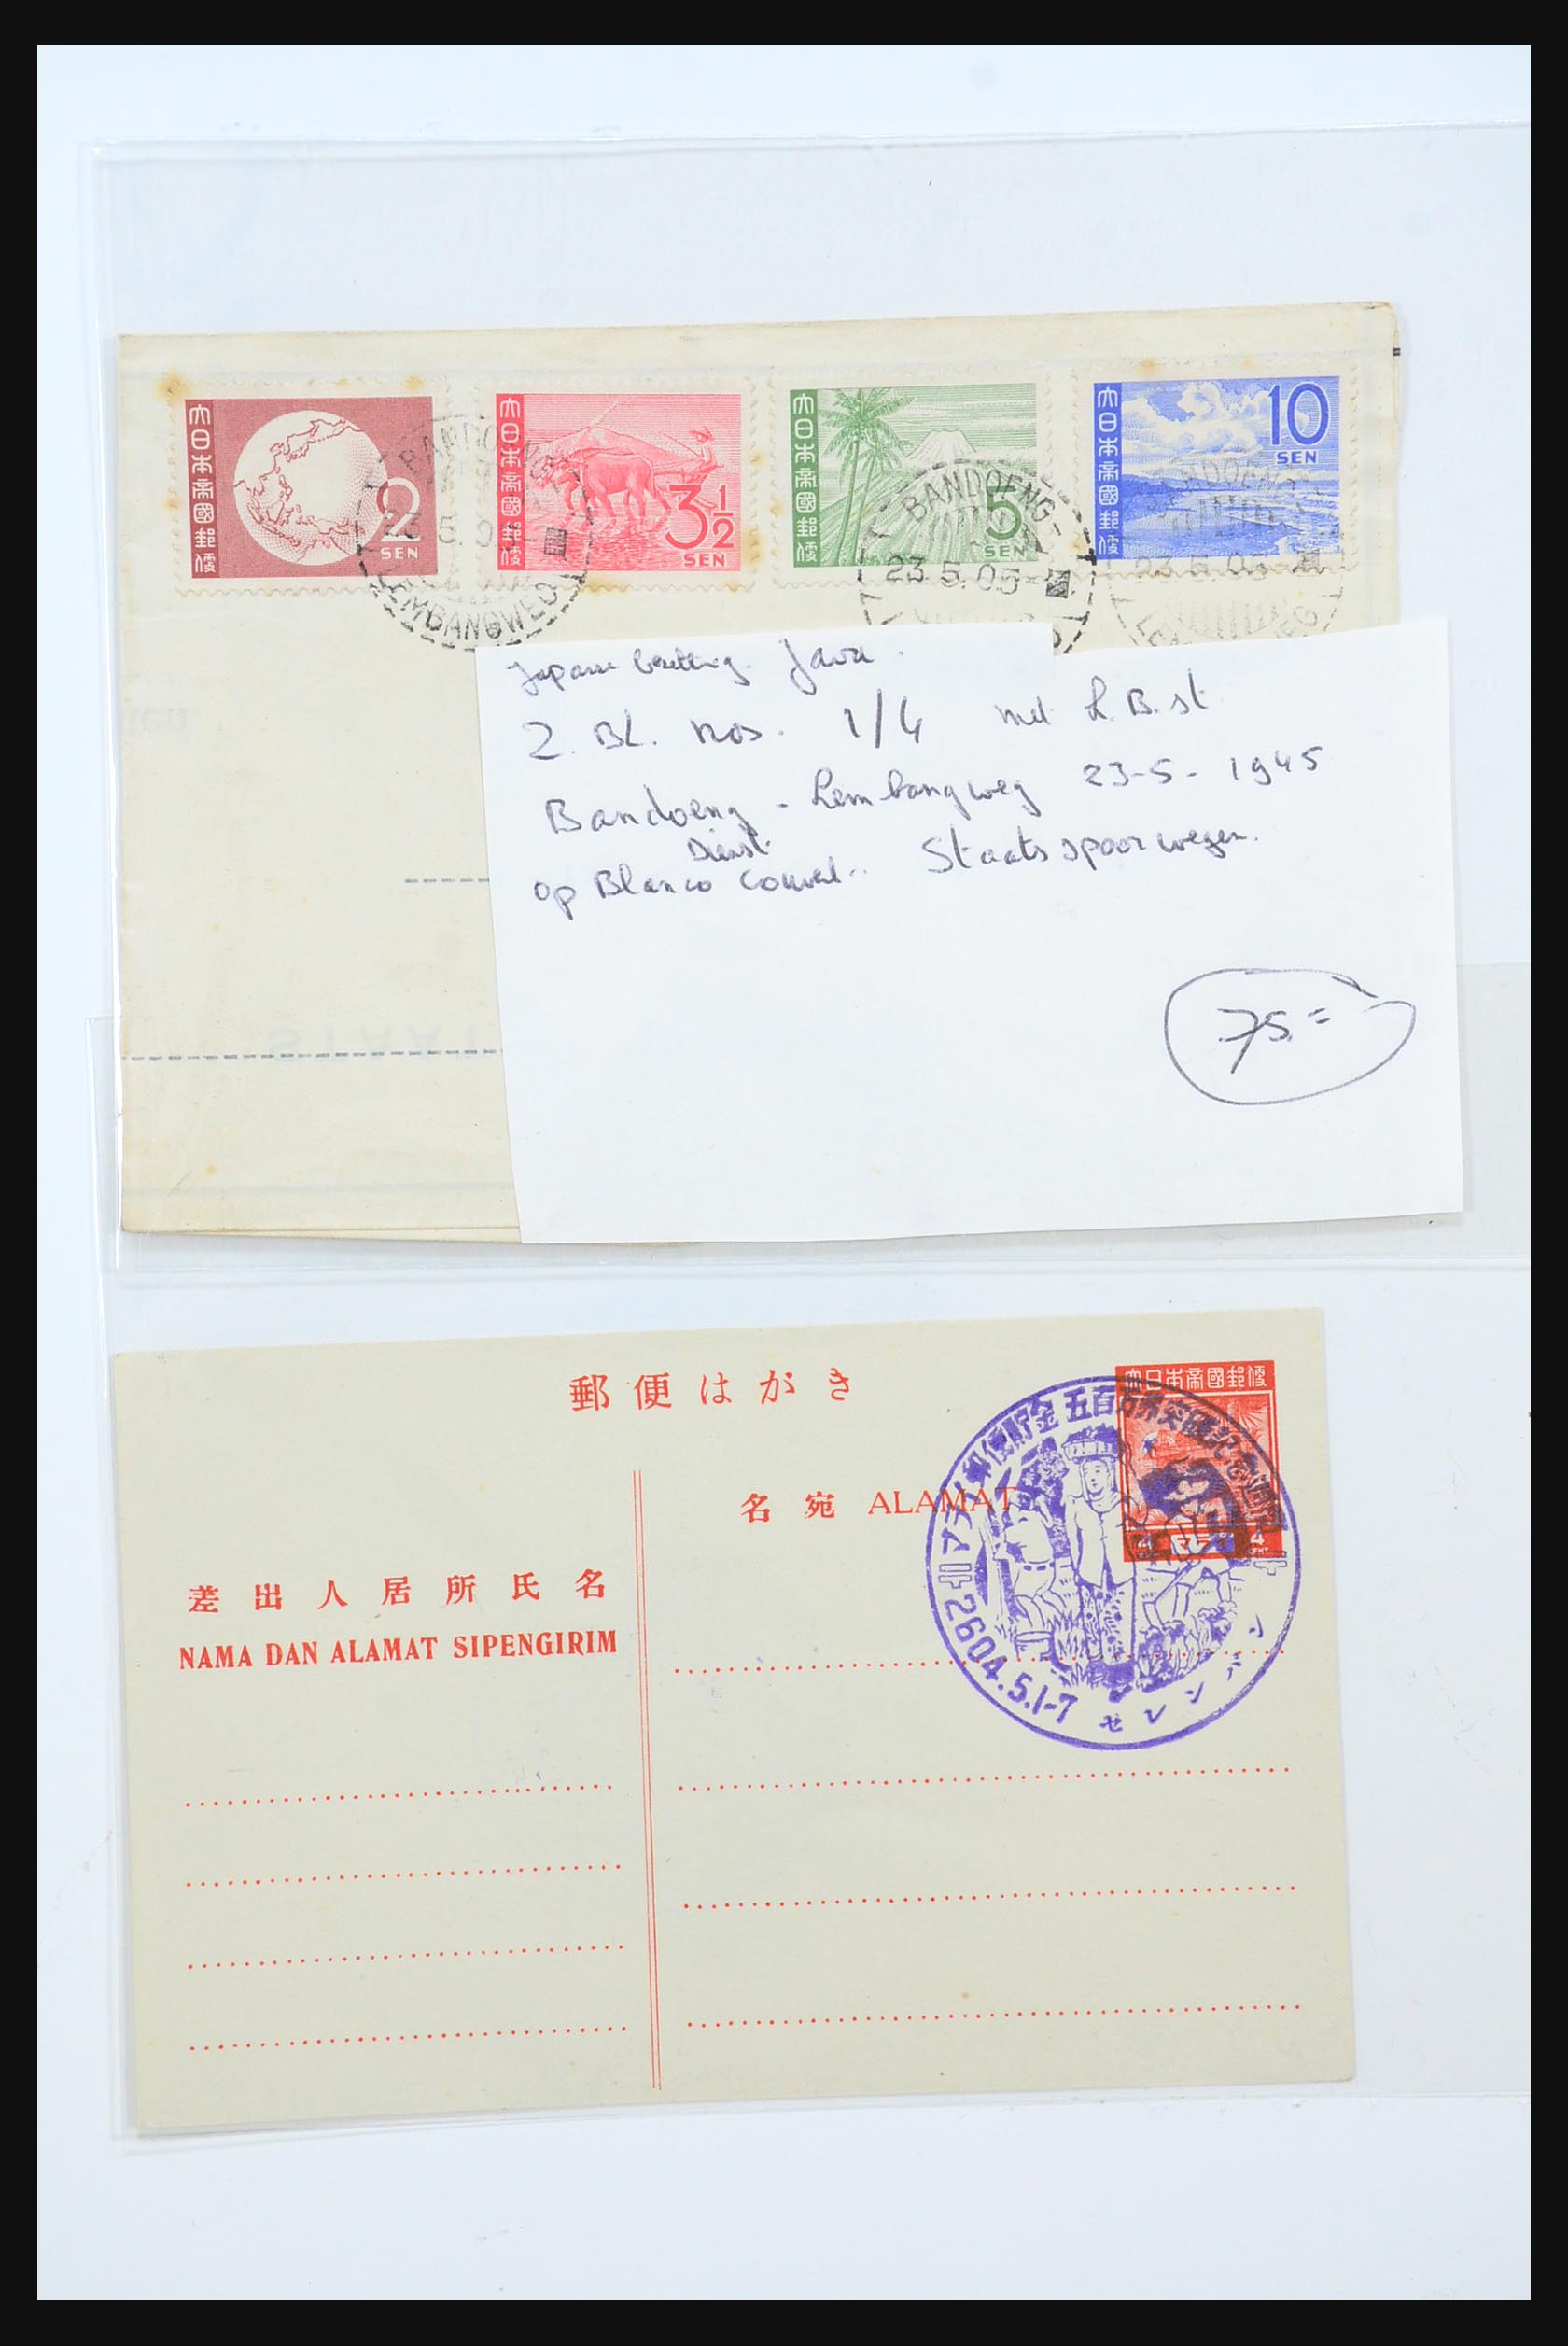 31362 121 - 31362 Netherlands Indies Japanese occupation covers 1942-1945.